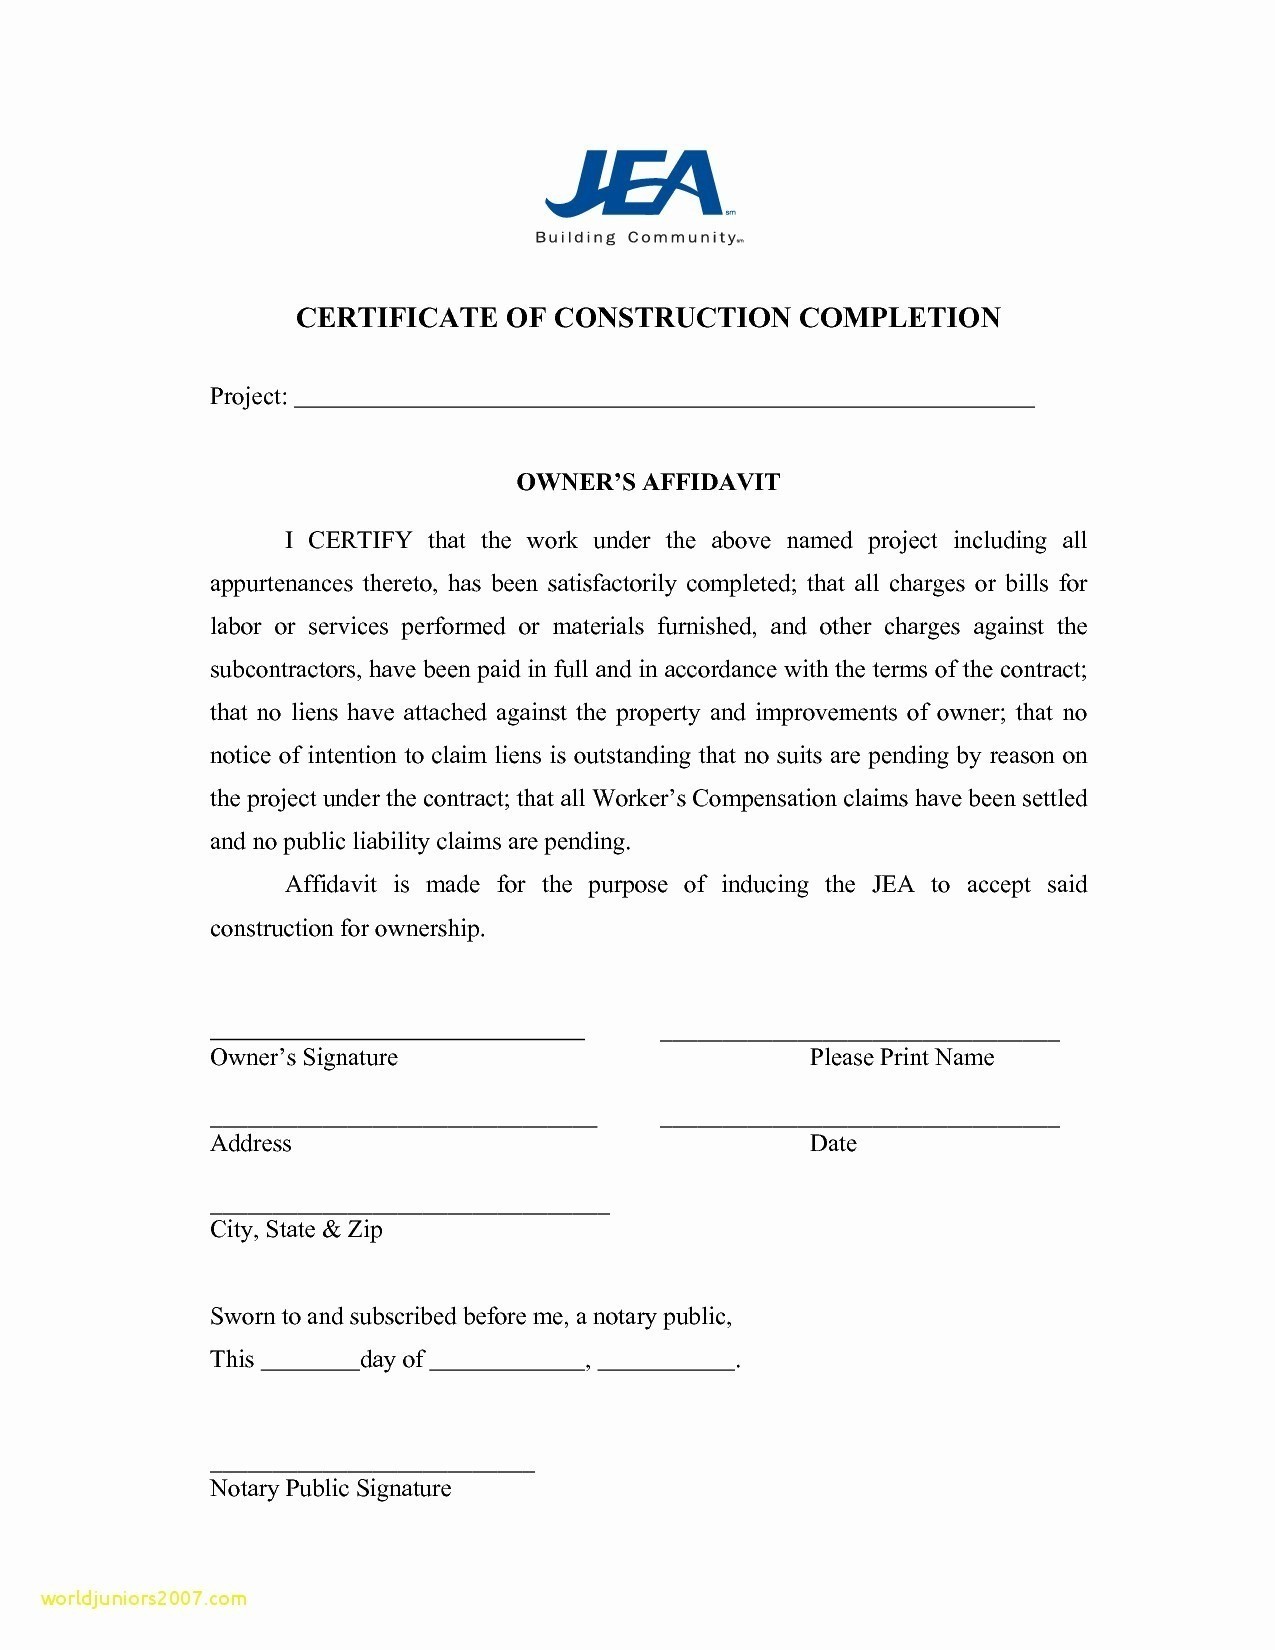 Letter Of Substantial Completion Template Examples | Letter With Regard To Certificate Of Substantial Completion Template